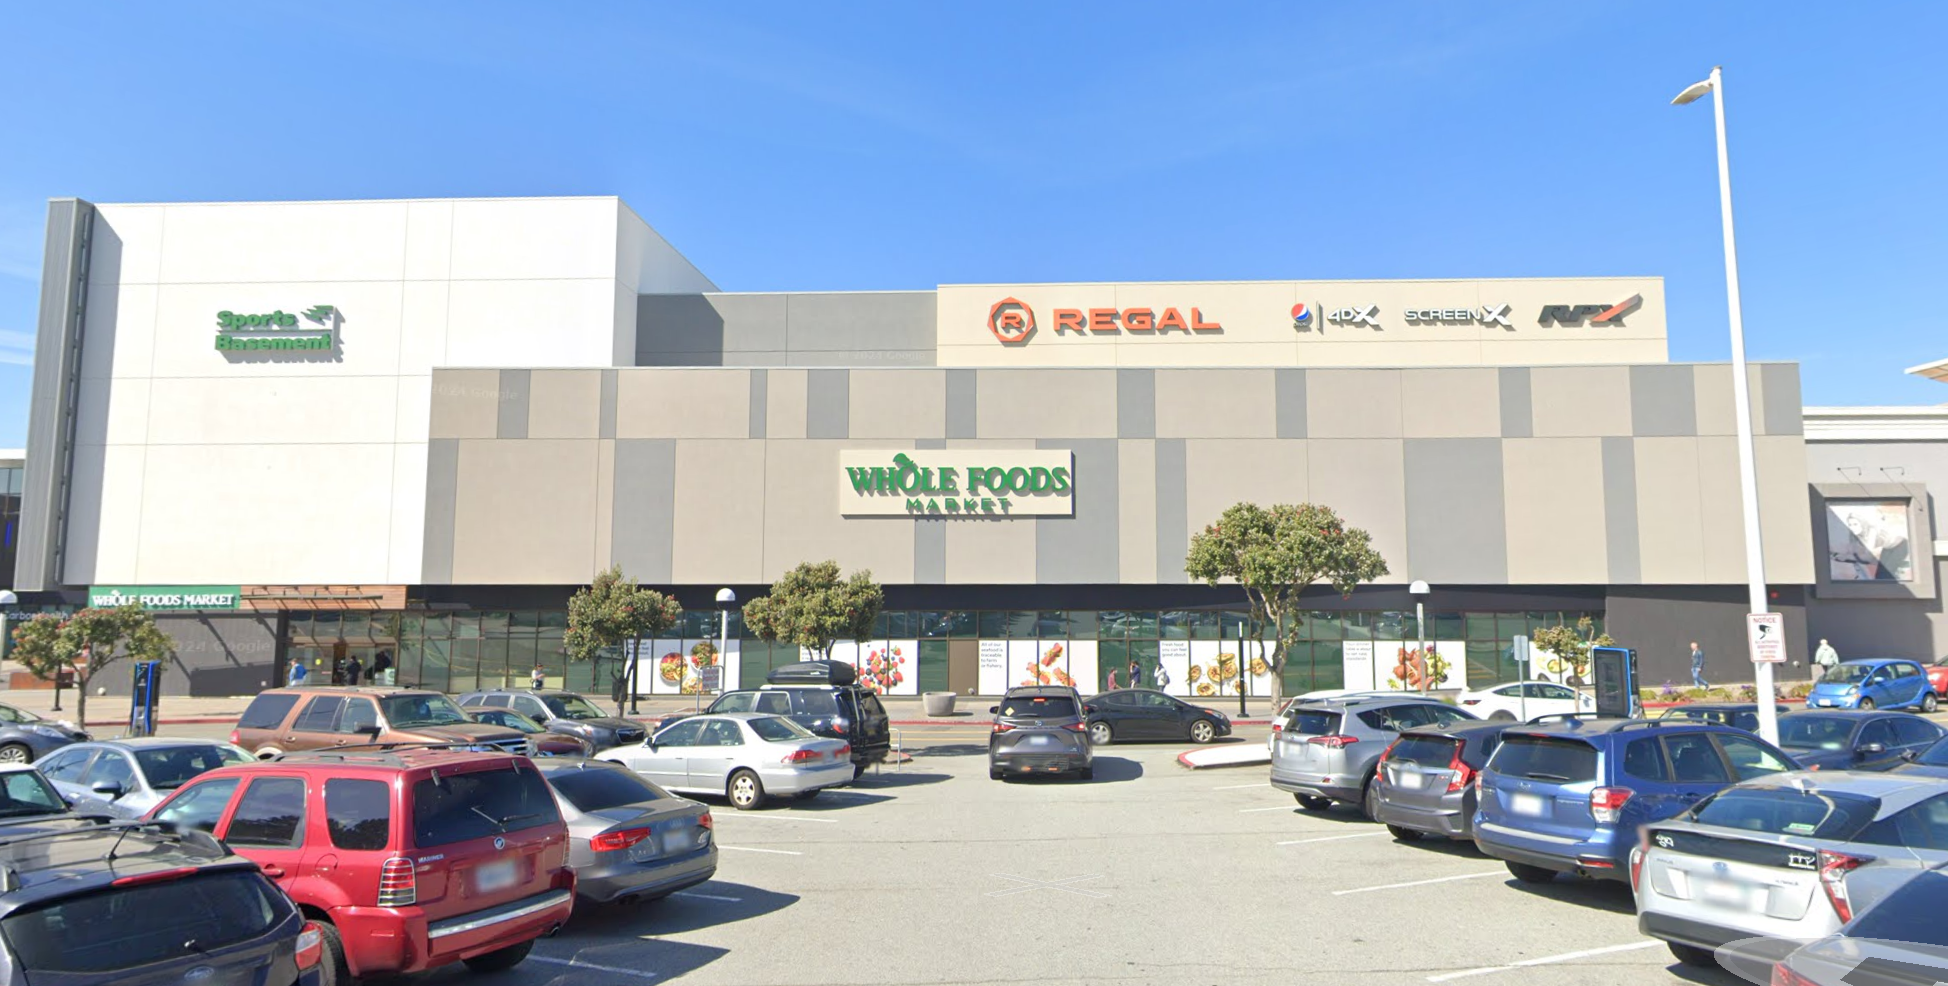 A parking lot in front of a mall with signs for Whole Foods and Regal Cinemas under a clear sky.